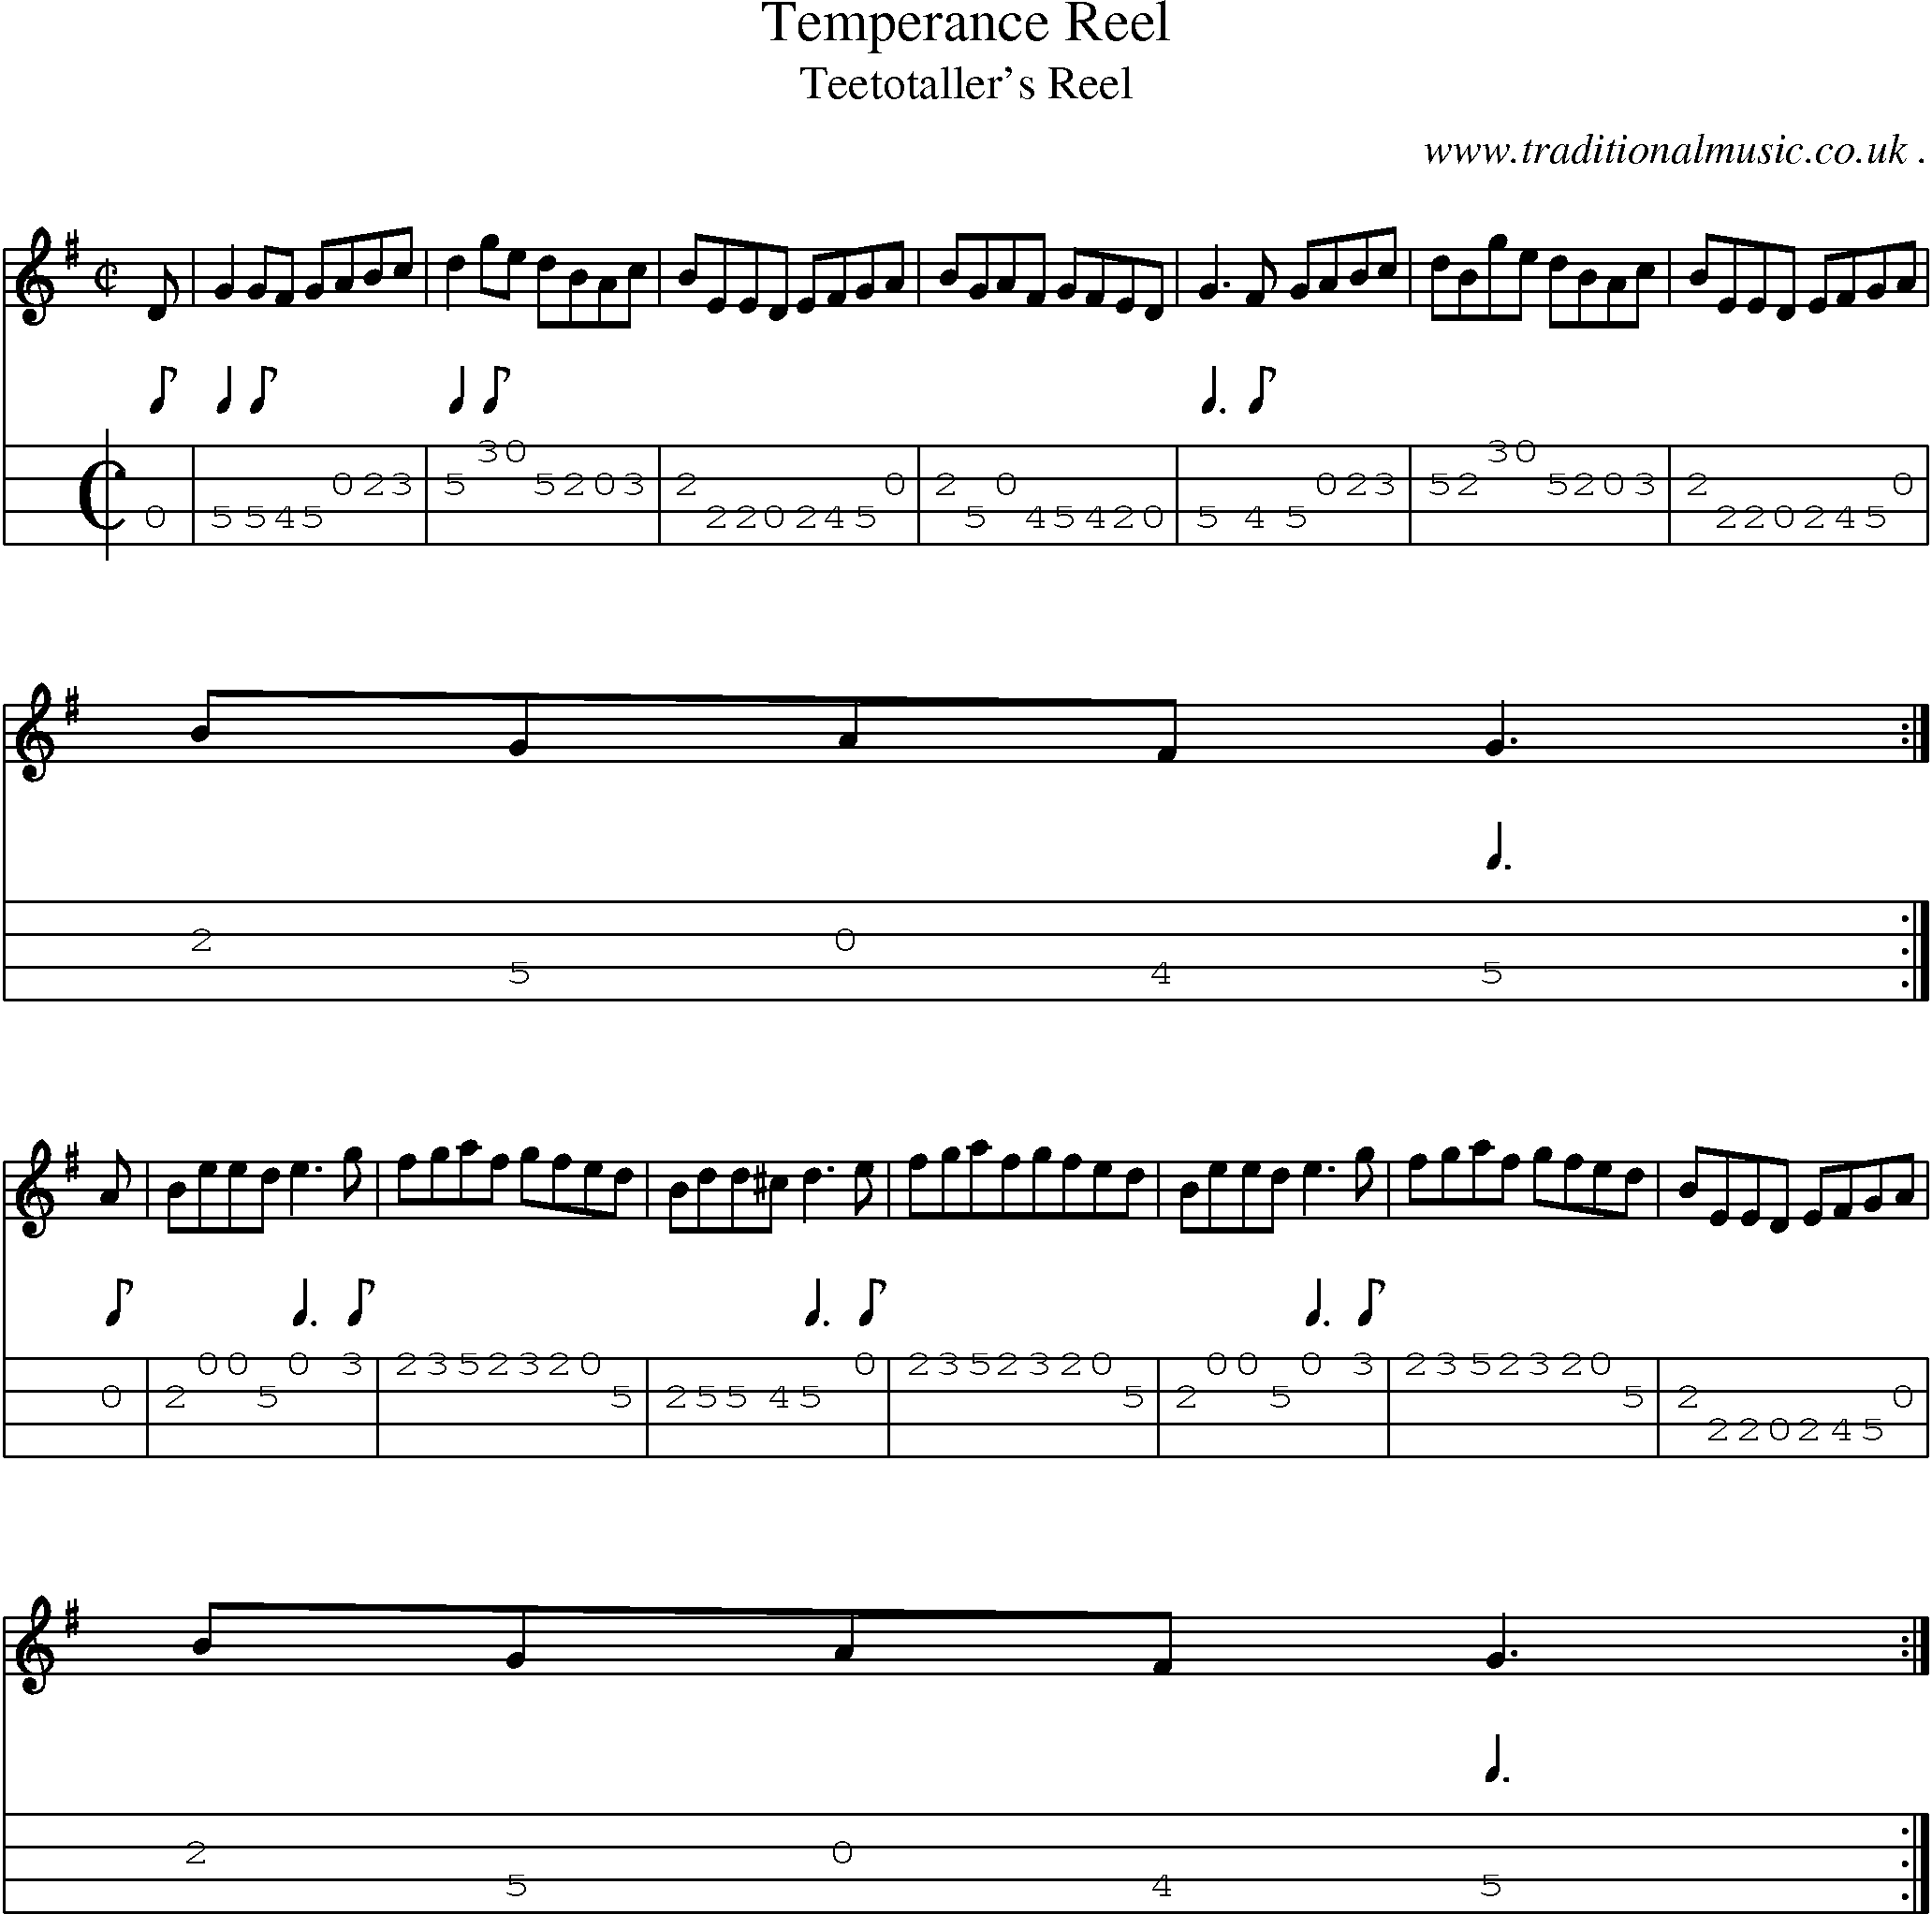 Sheet-Music and Mandolin Tabs for Temperance Reel